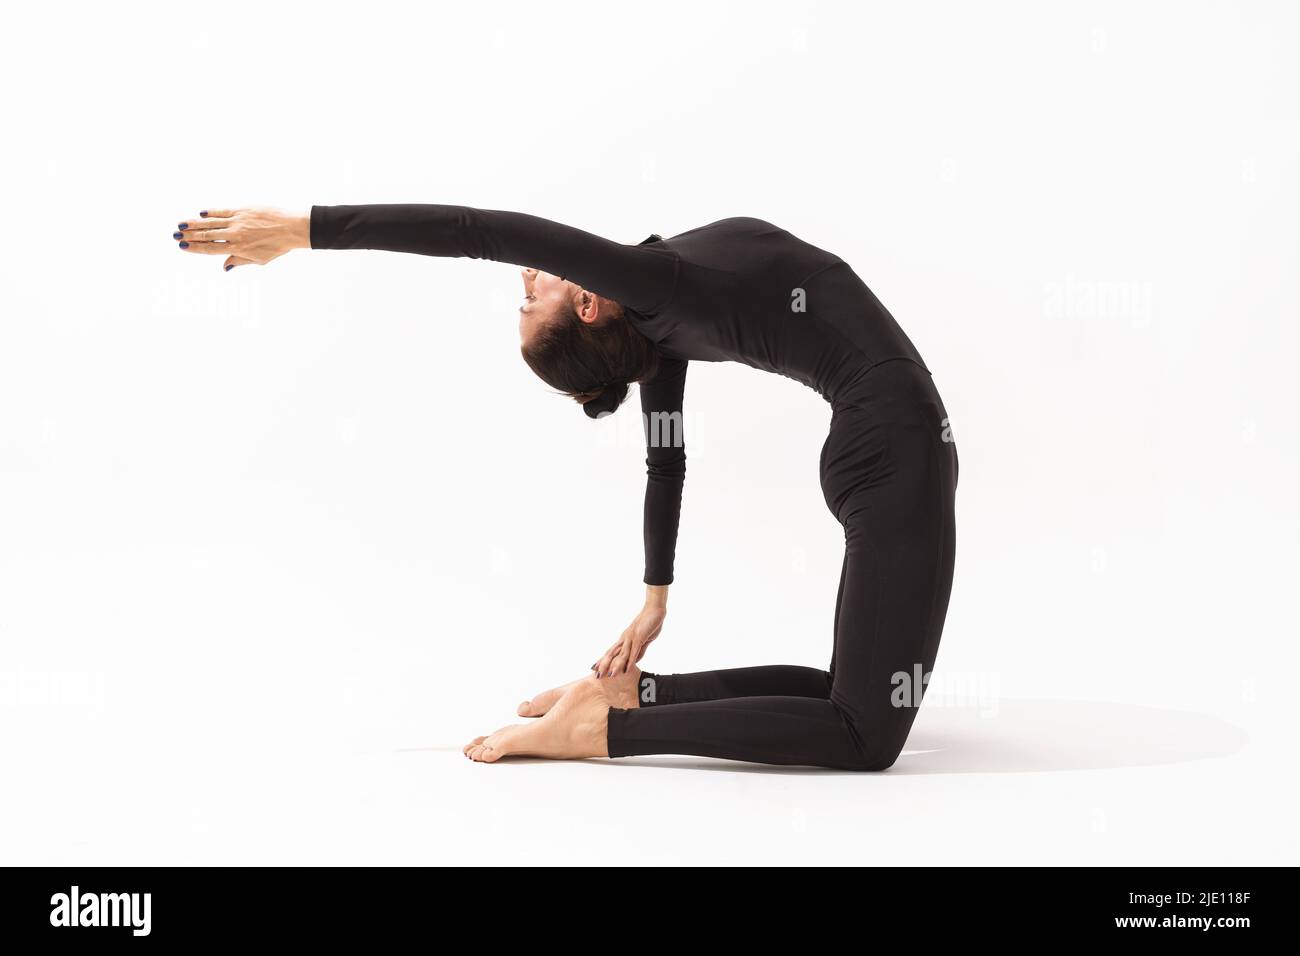 A woman in a black tracksuit practicing yoga performs a variation of the Ushtrasana exercise, camel pose with outstretched arm, on a white background Stock Photo